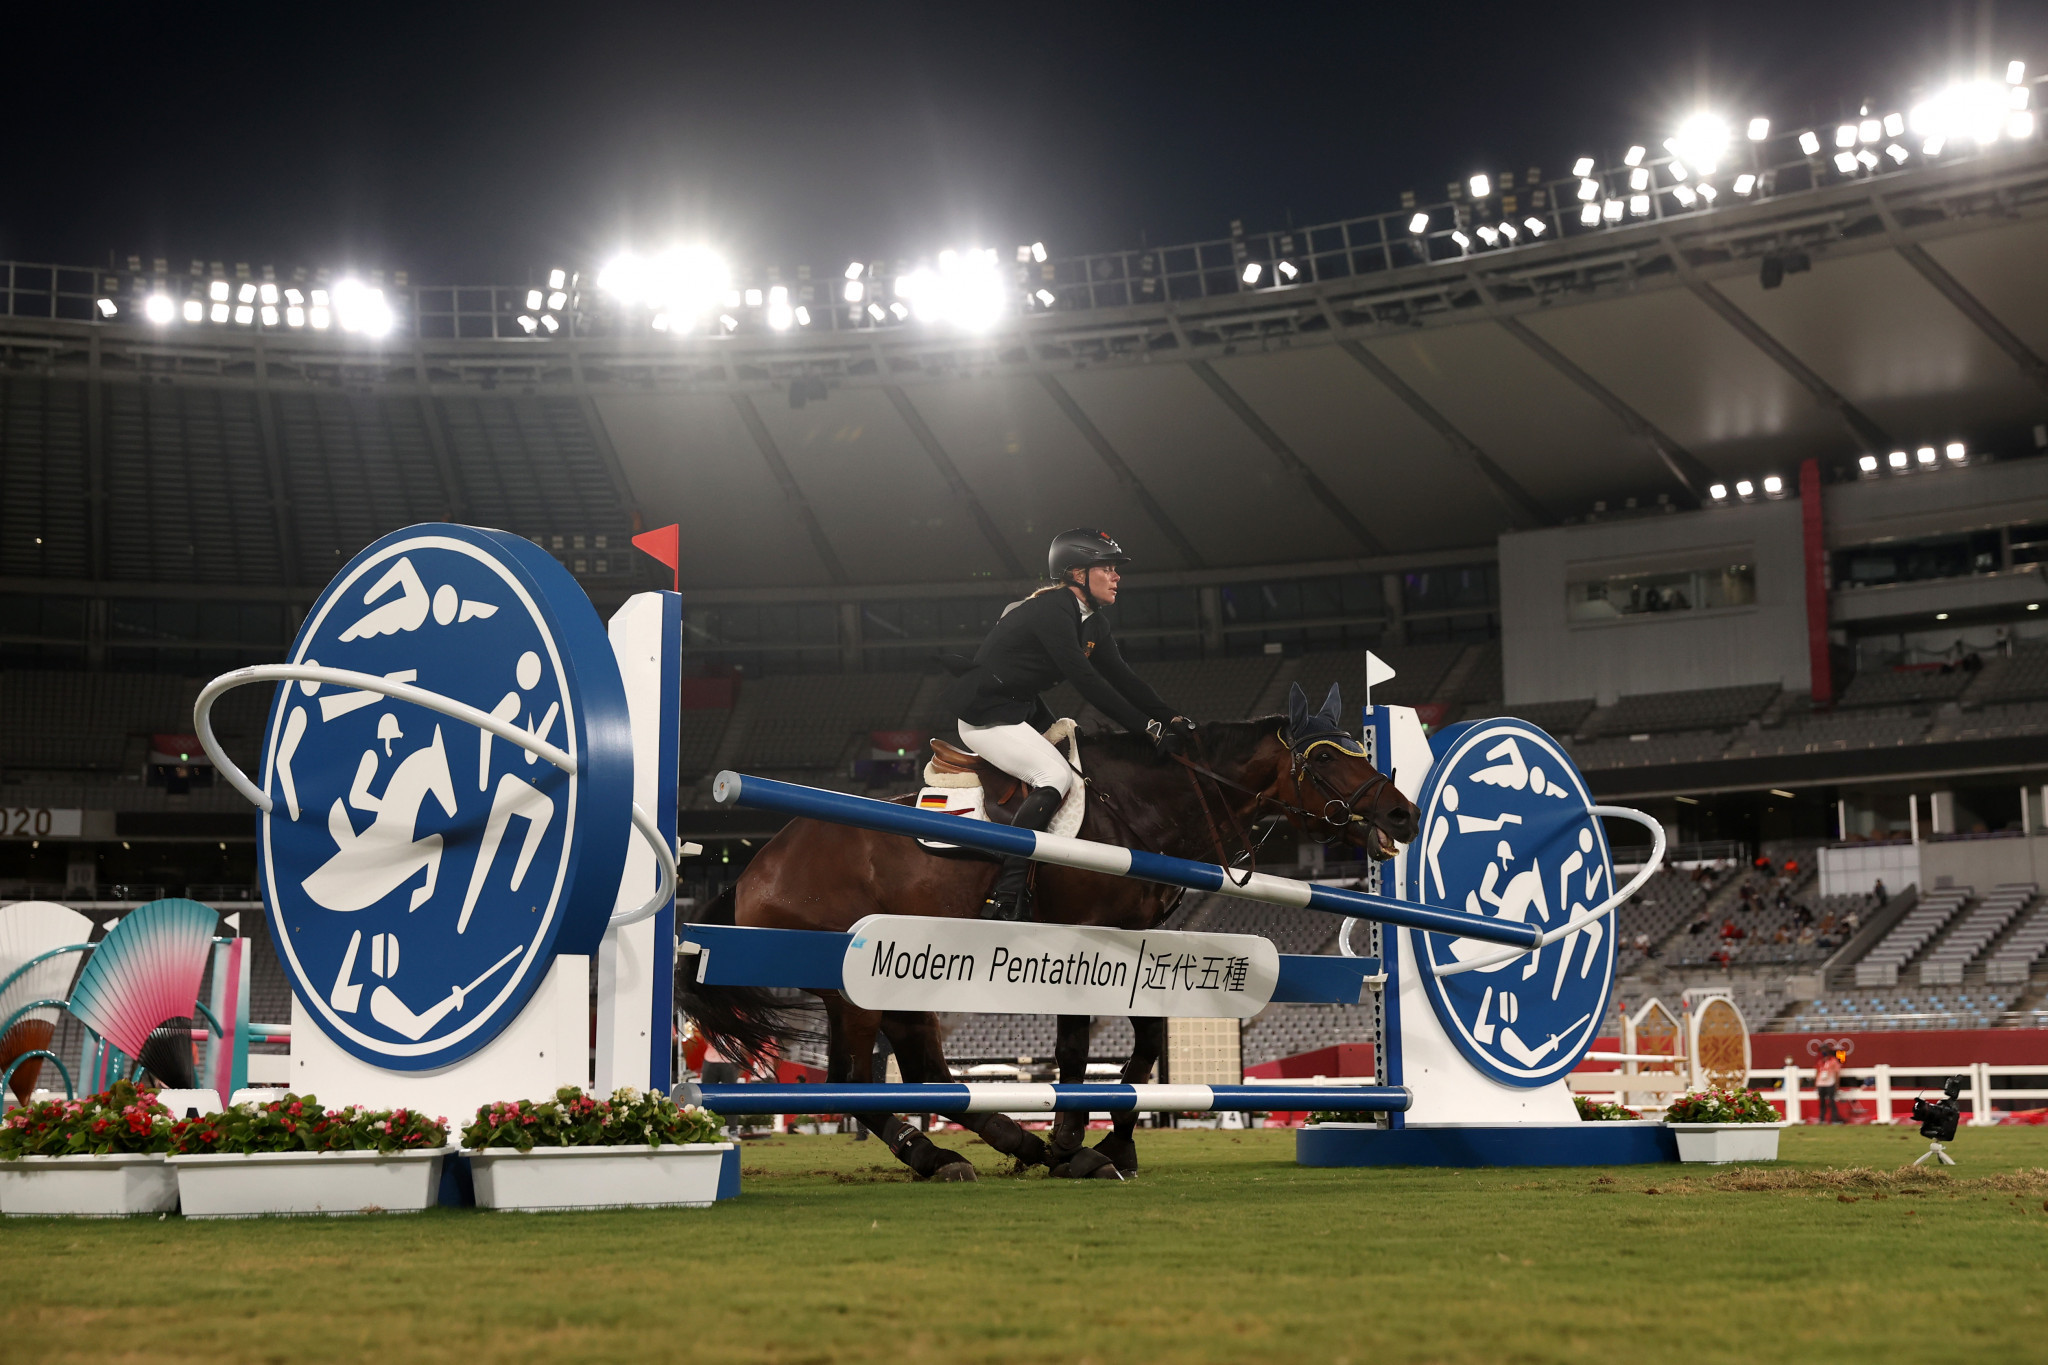 Saint Boy refused to jump in the riding element of the women's modern pentathlon, with coach Kim Raisner sent home from the Olympic Games in disgrace after repeatedly striking the horse ©Getty Images